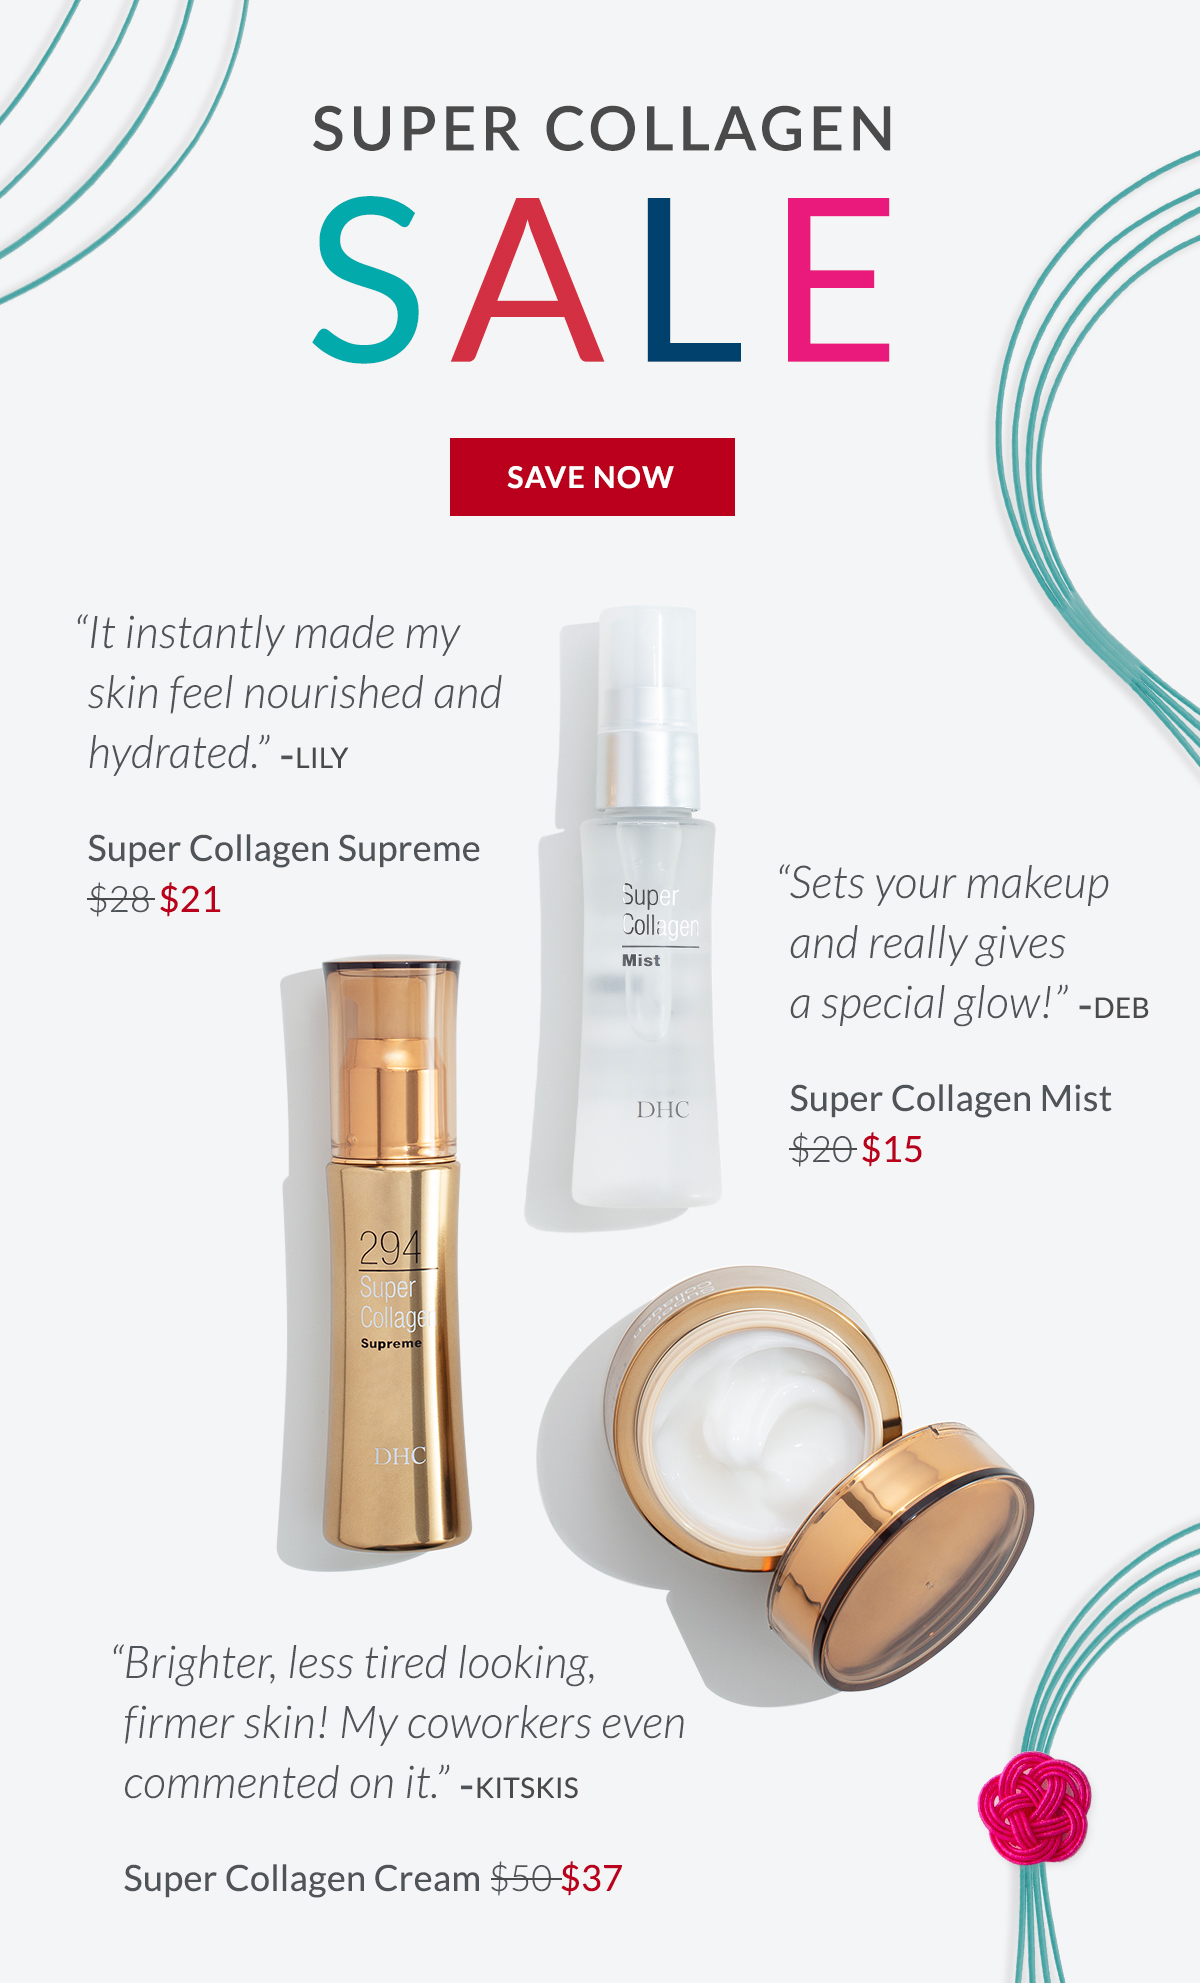 Super Collagen Products on Sale!